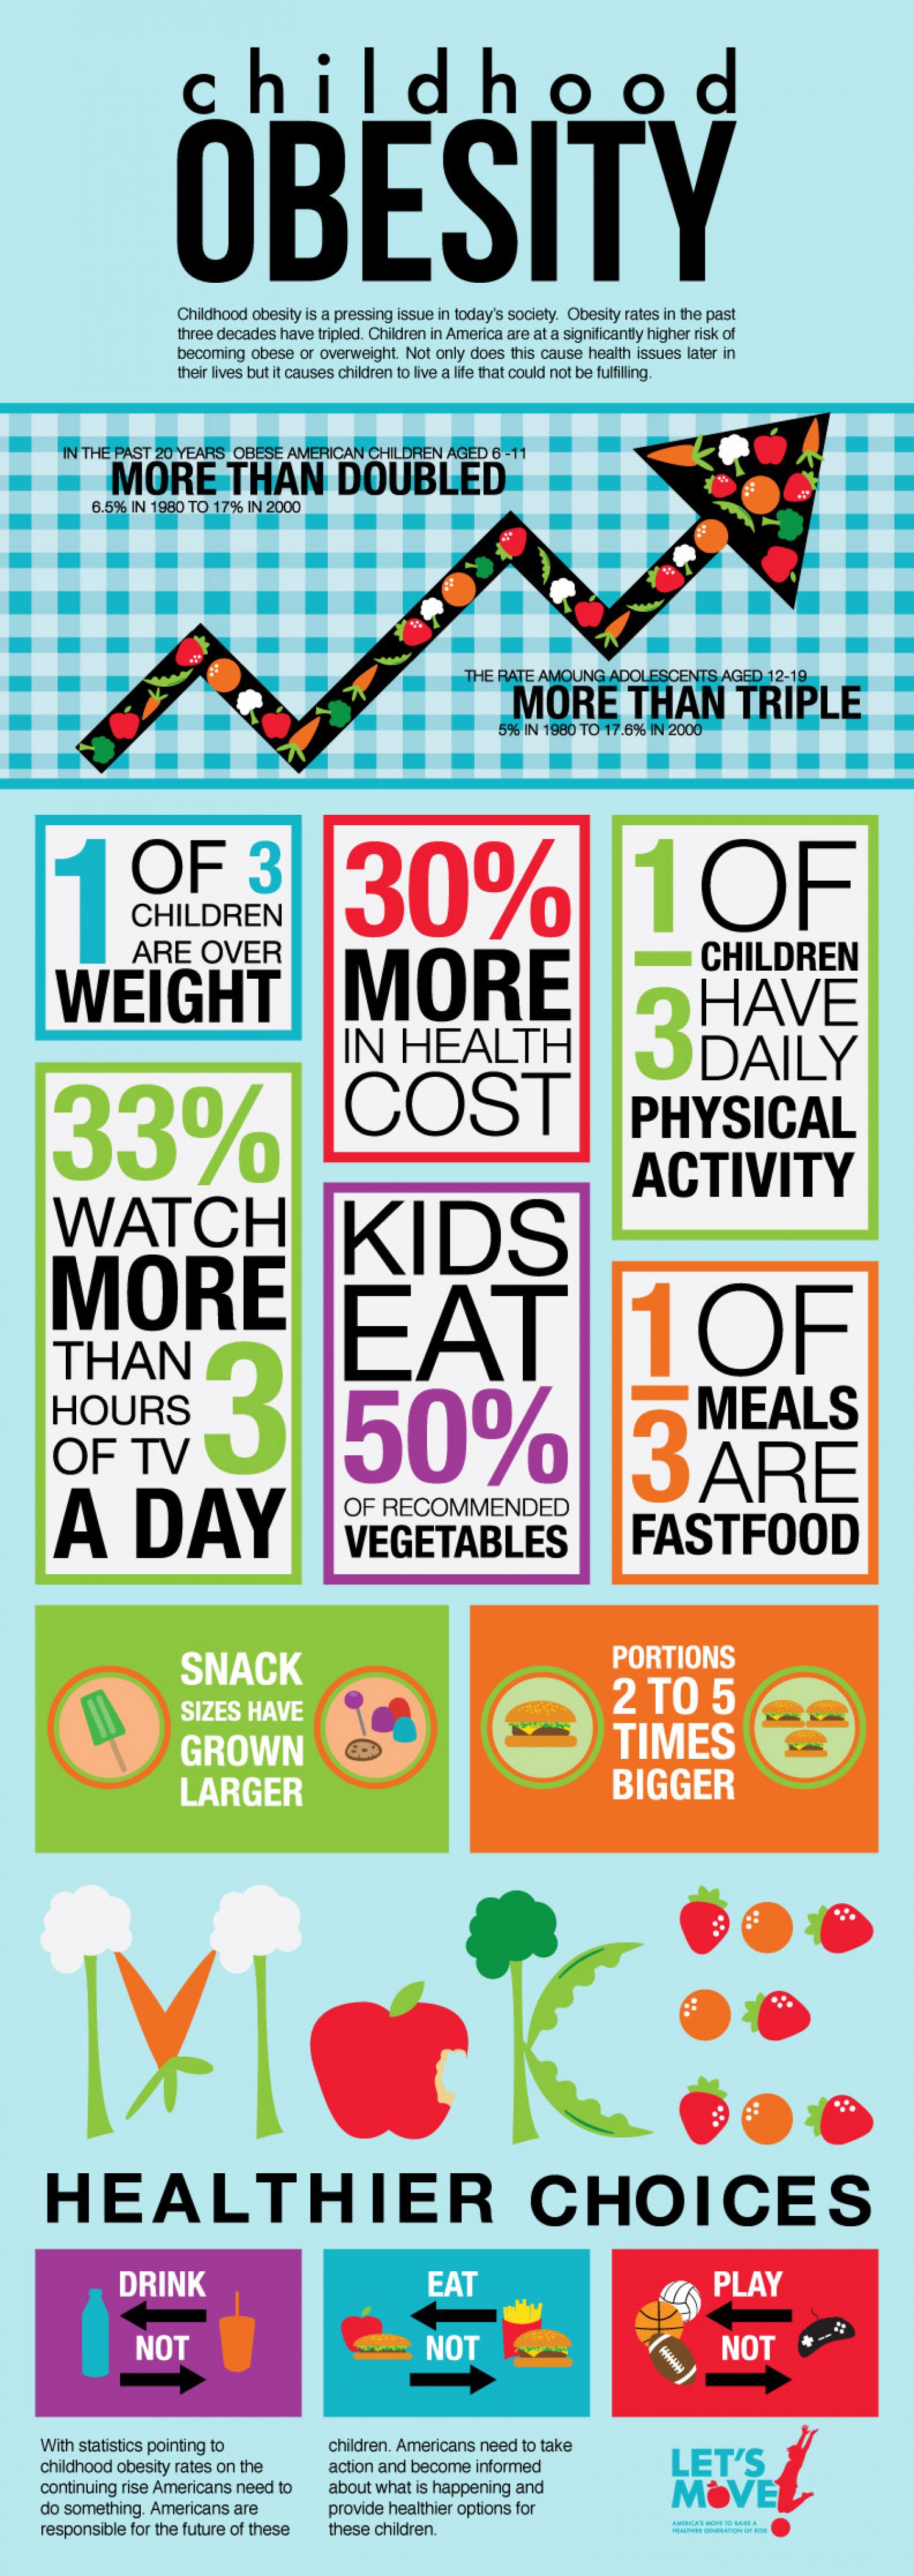 obesity facts